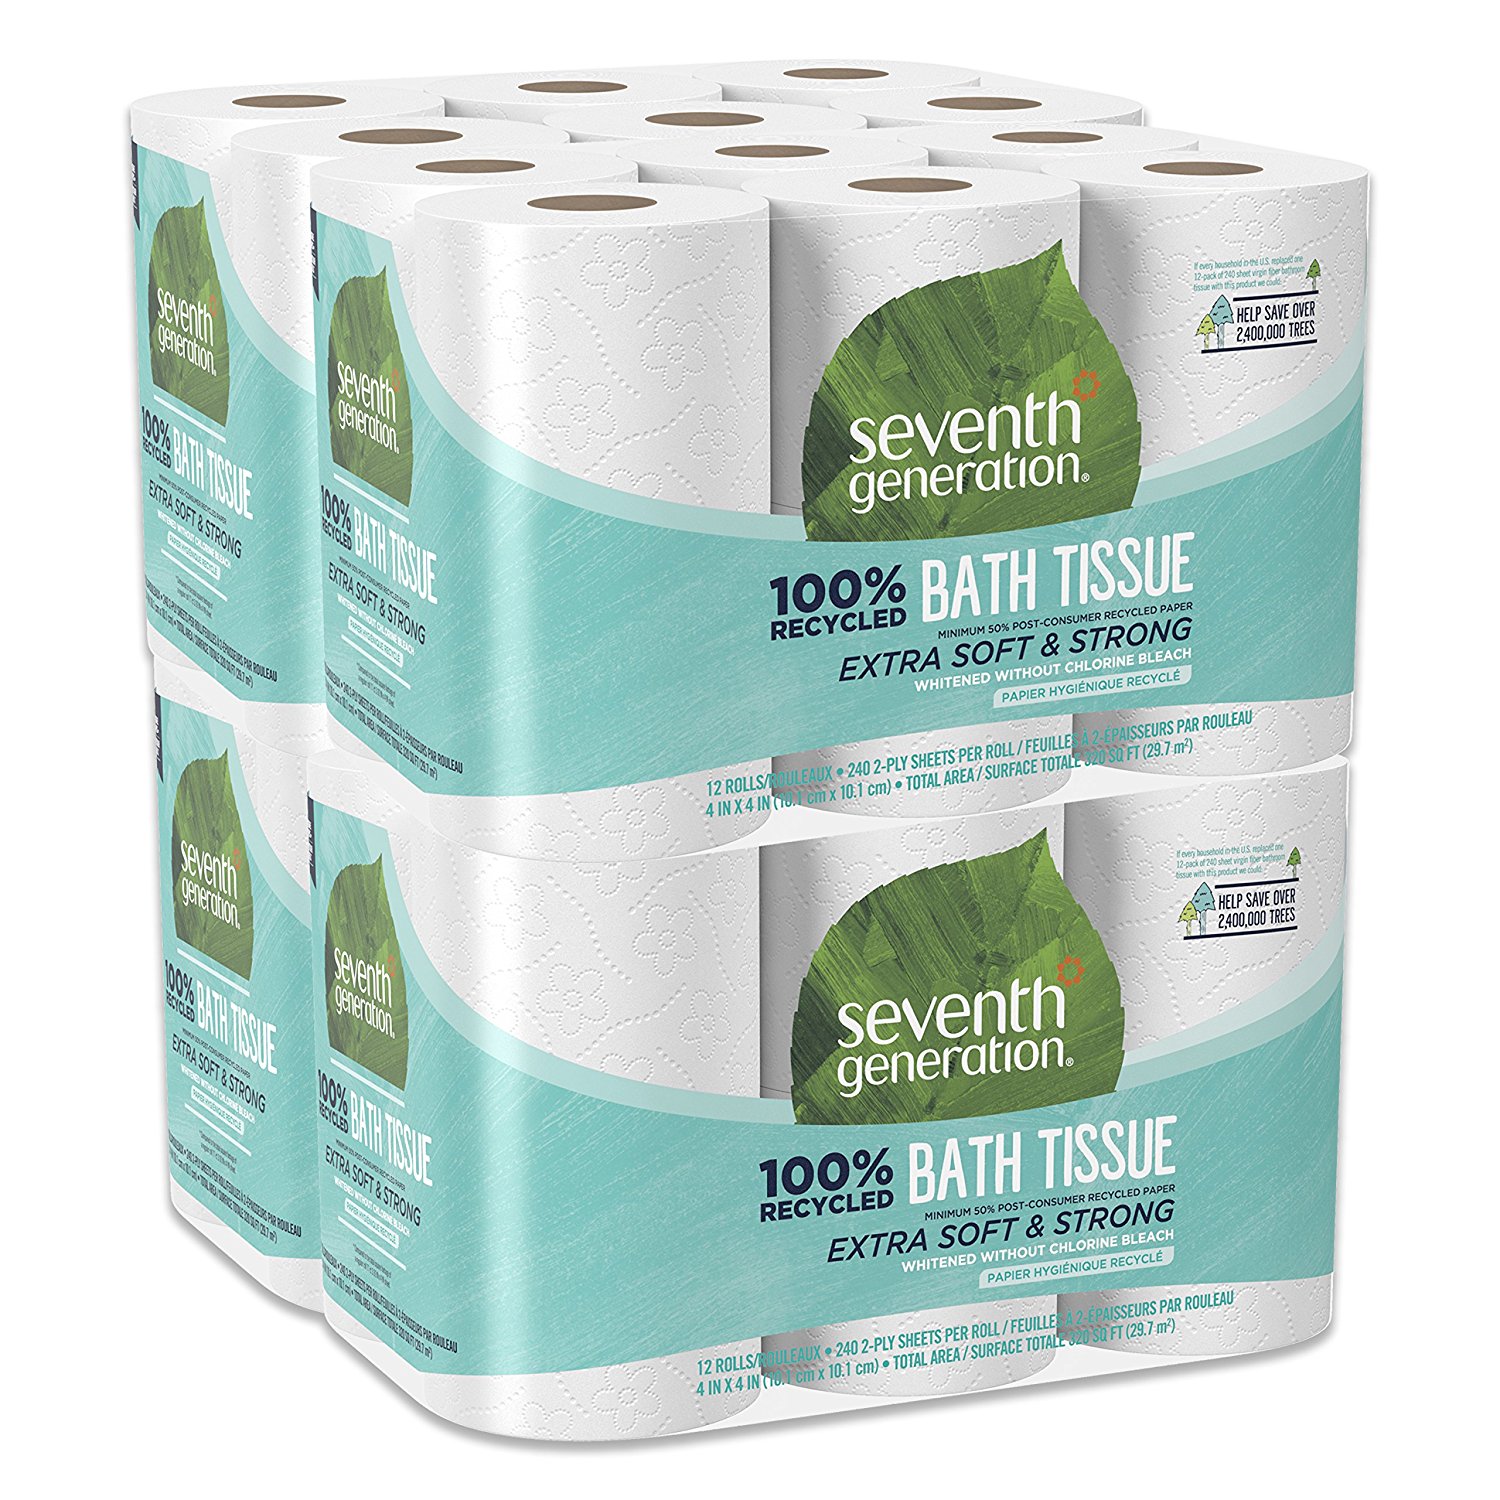 Seventh Generation Toilet Paper, Bath Tissue, 100% Recycled Paper, 48 Rolls (Packaging May Vary)